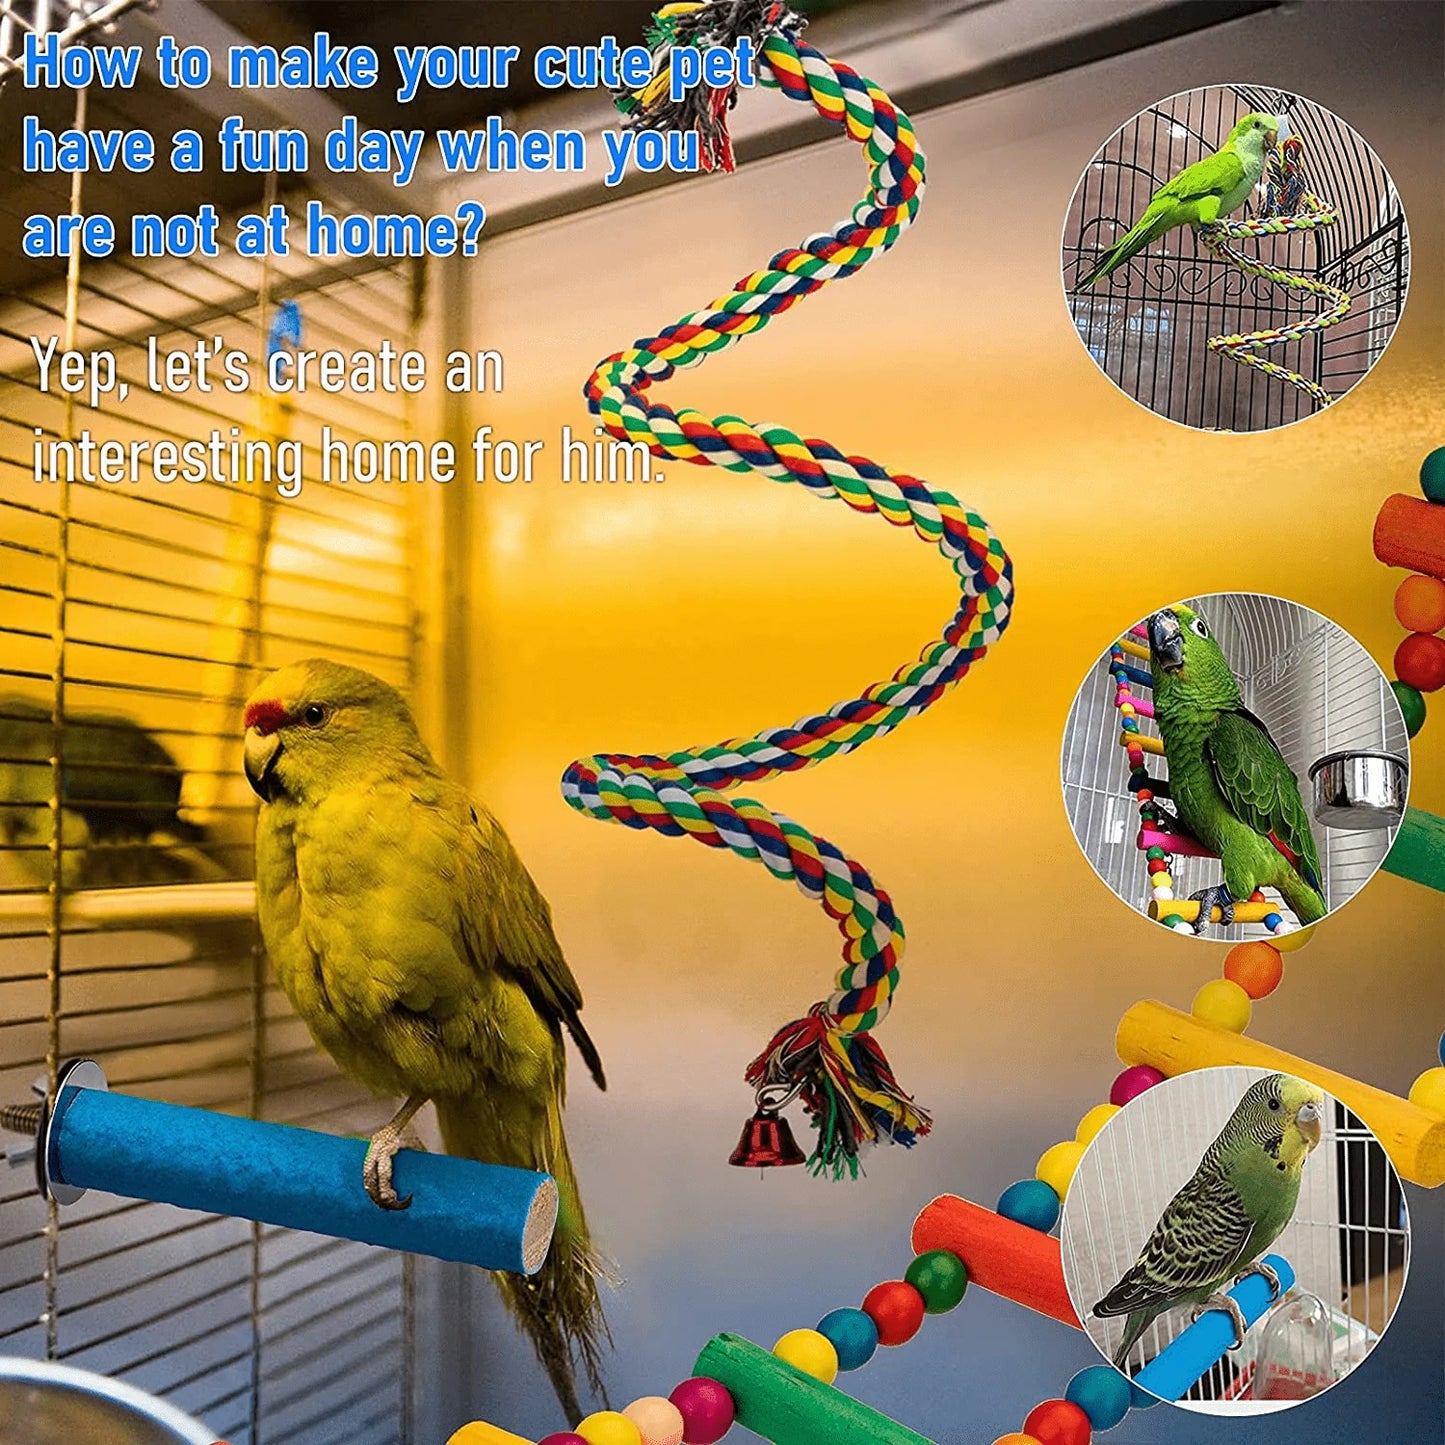 YAYMEW Bird Cage Accessories Perches Stand Rope Ladder Hanging Swing Toys for Small Parrots and Birds Only (3 Pcs)